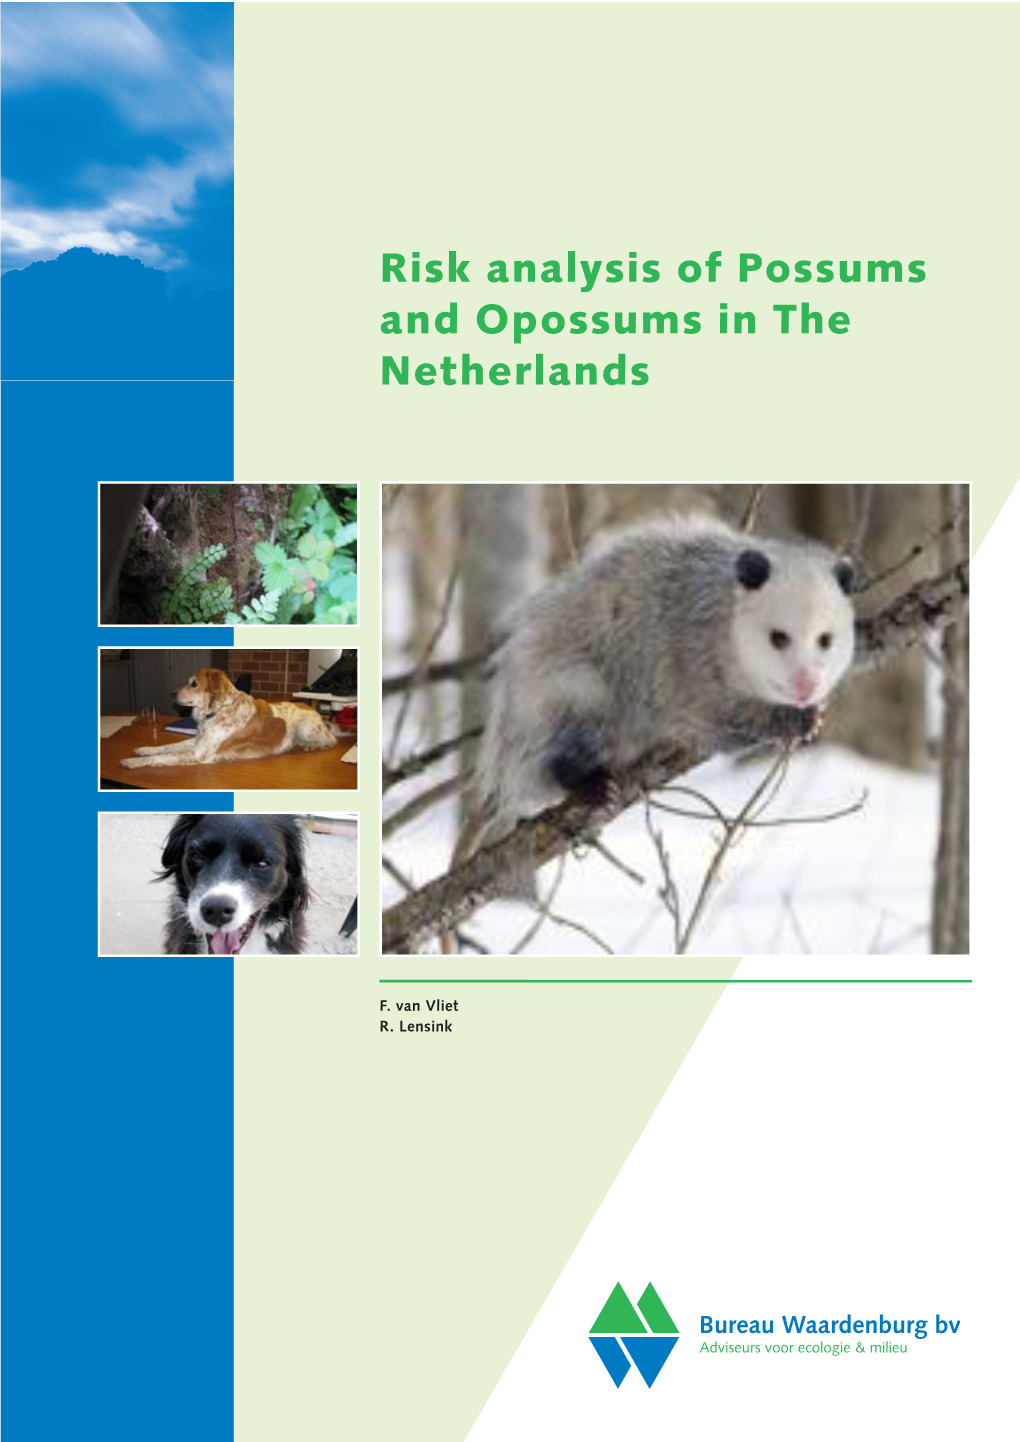 Risk Analysis of Possums and Opossums in the Netherlands